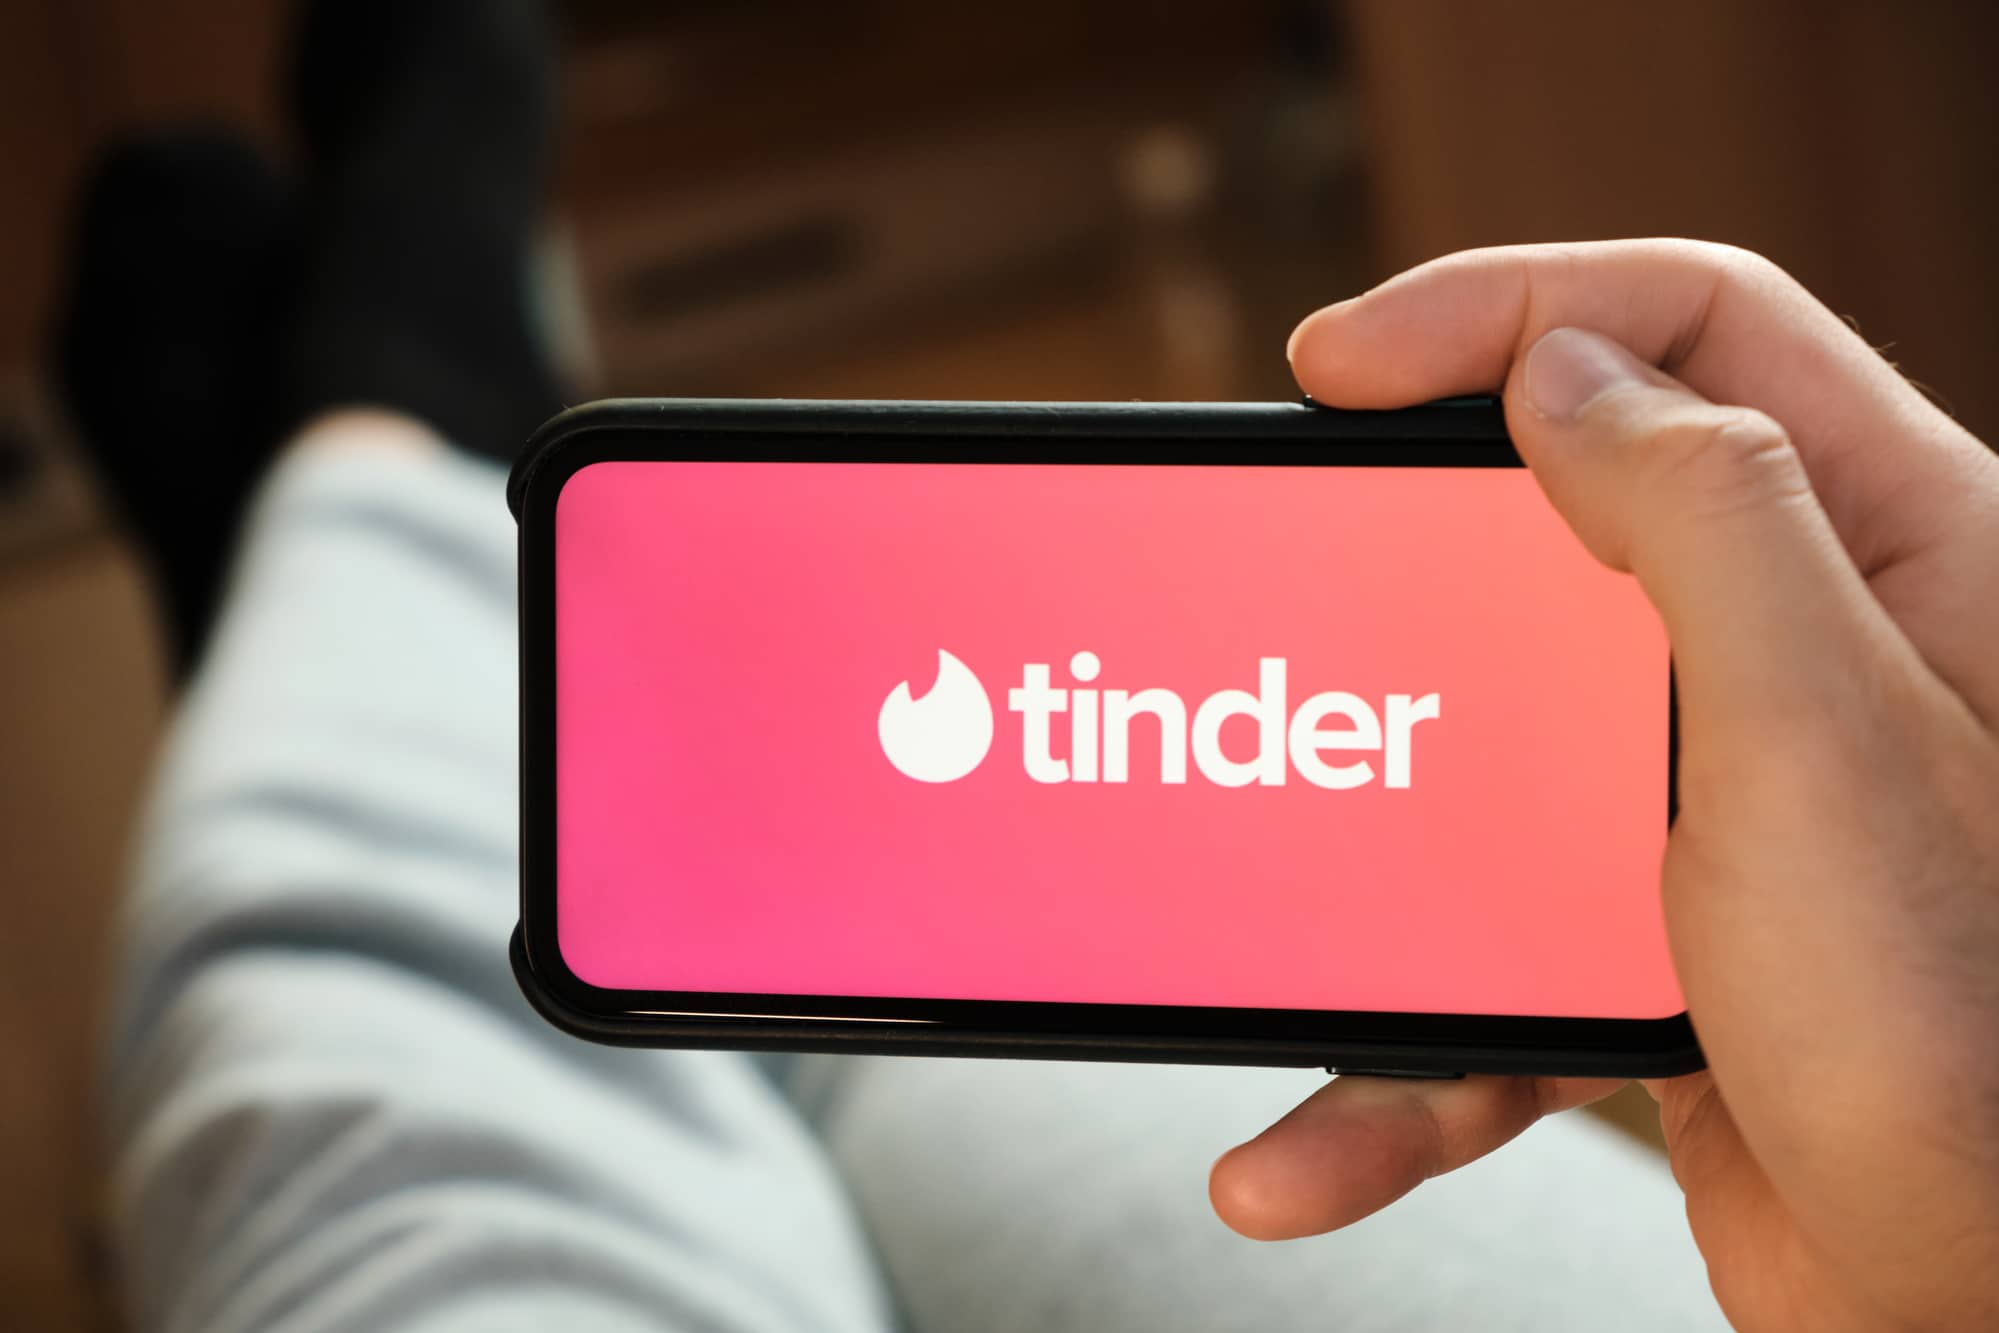 Tinder lands on Instagram together with a social campaign with Gaia Clerici, Tananai and other thumbnails